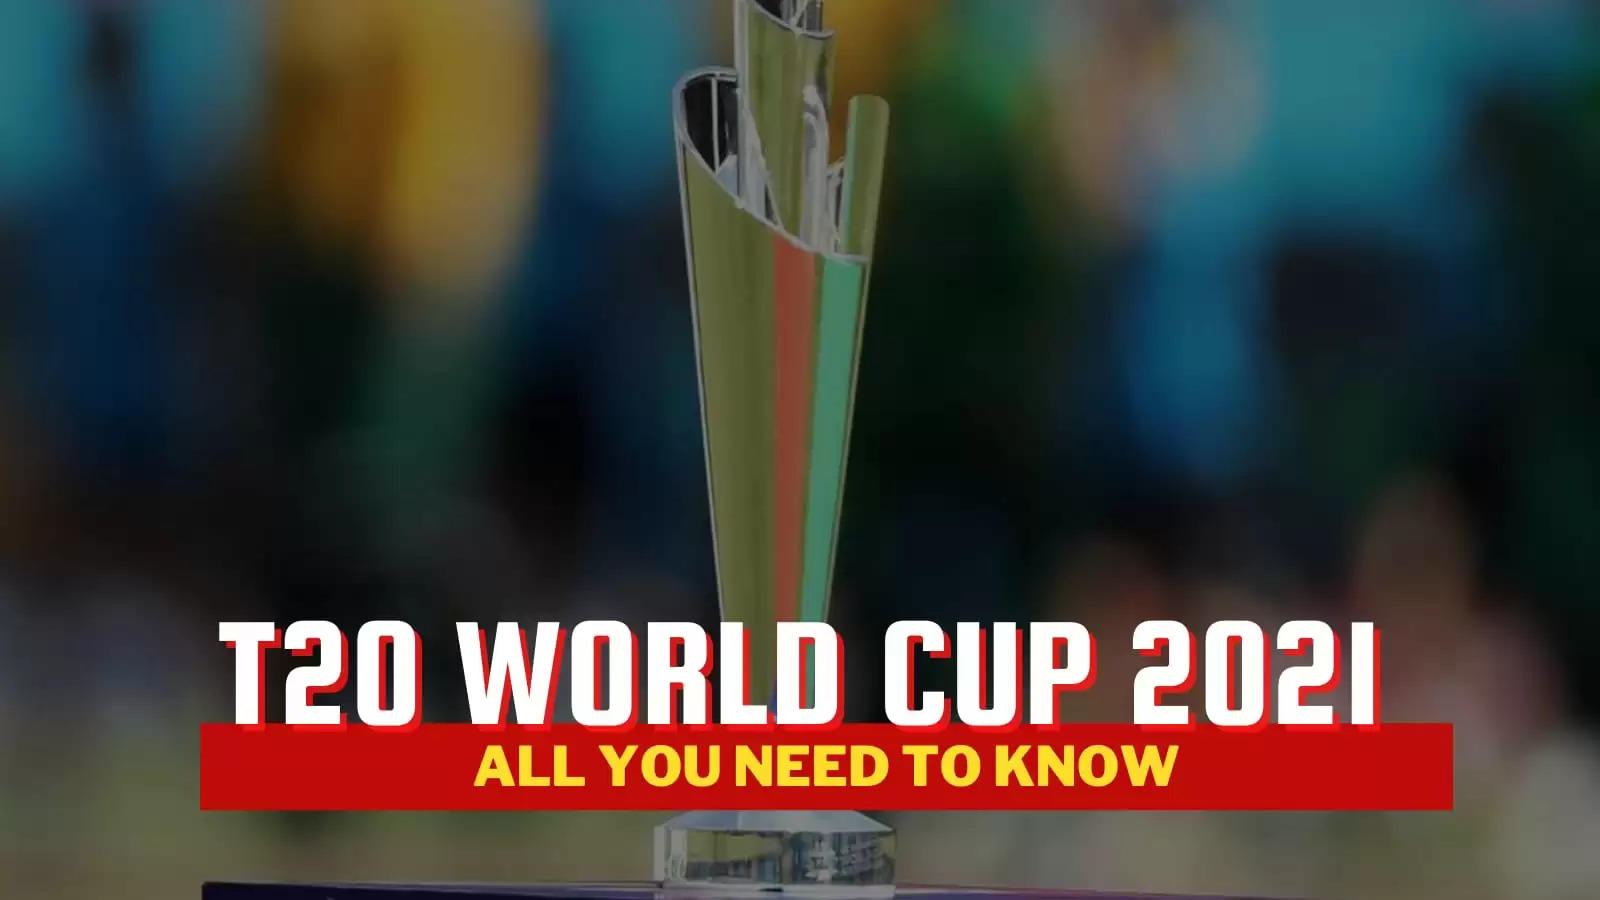 All you need to know about the ICC Men’s T20 World Cup 2021: Tournament structure, groups, fixtures, start time, squads and prize money